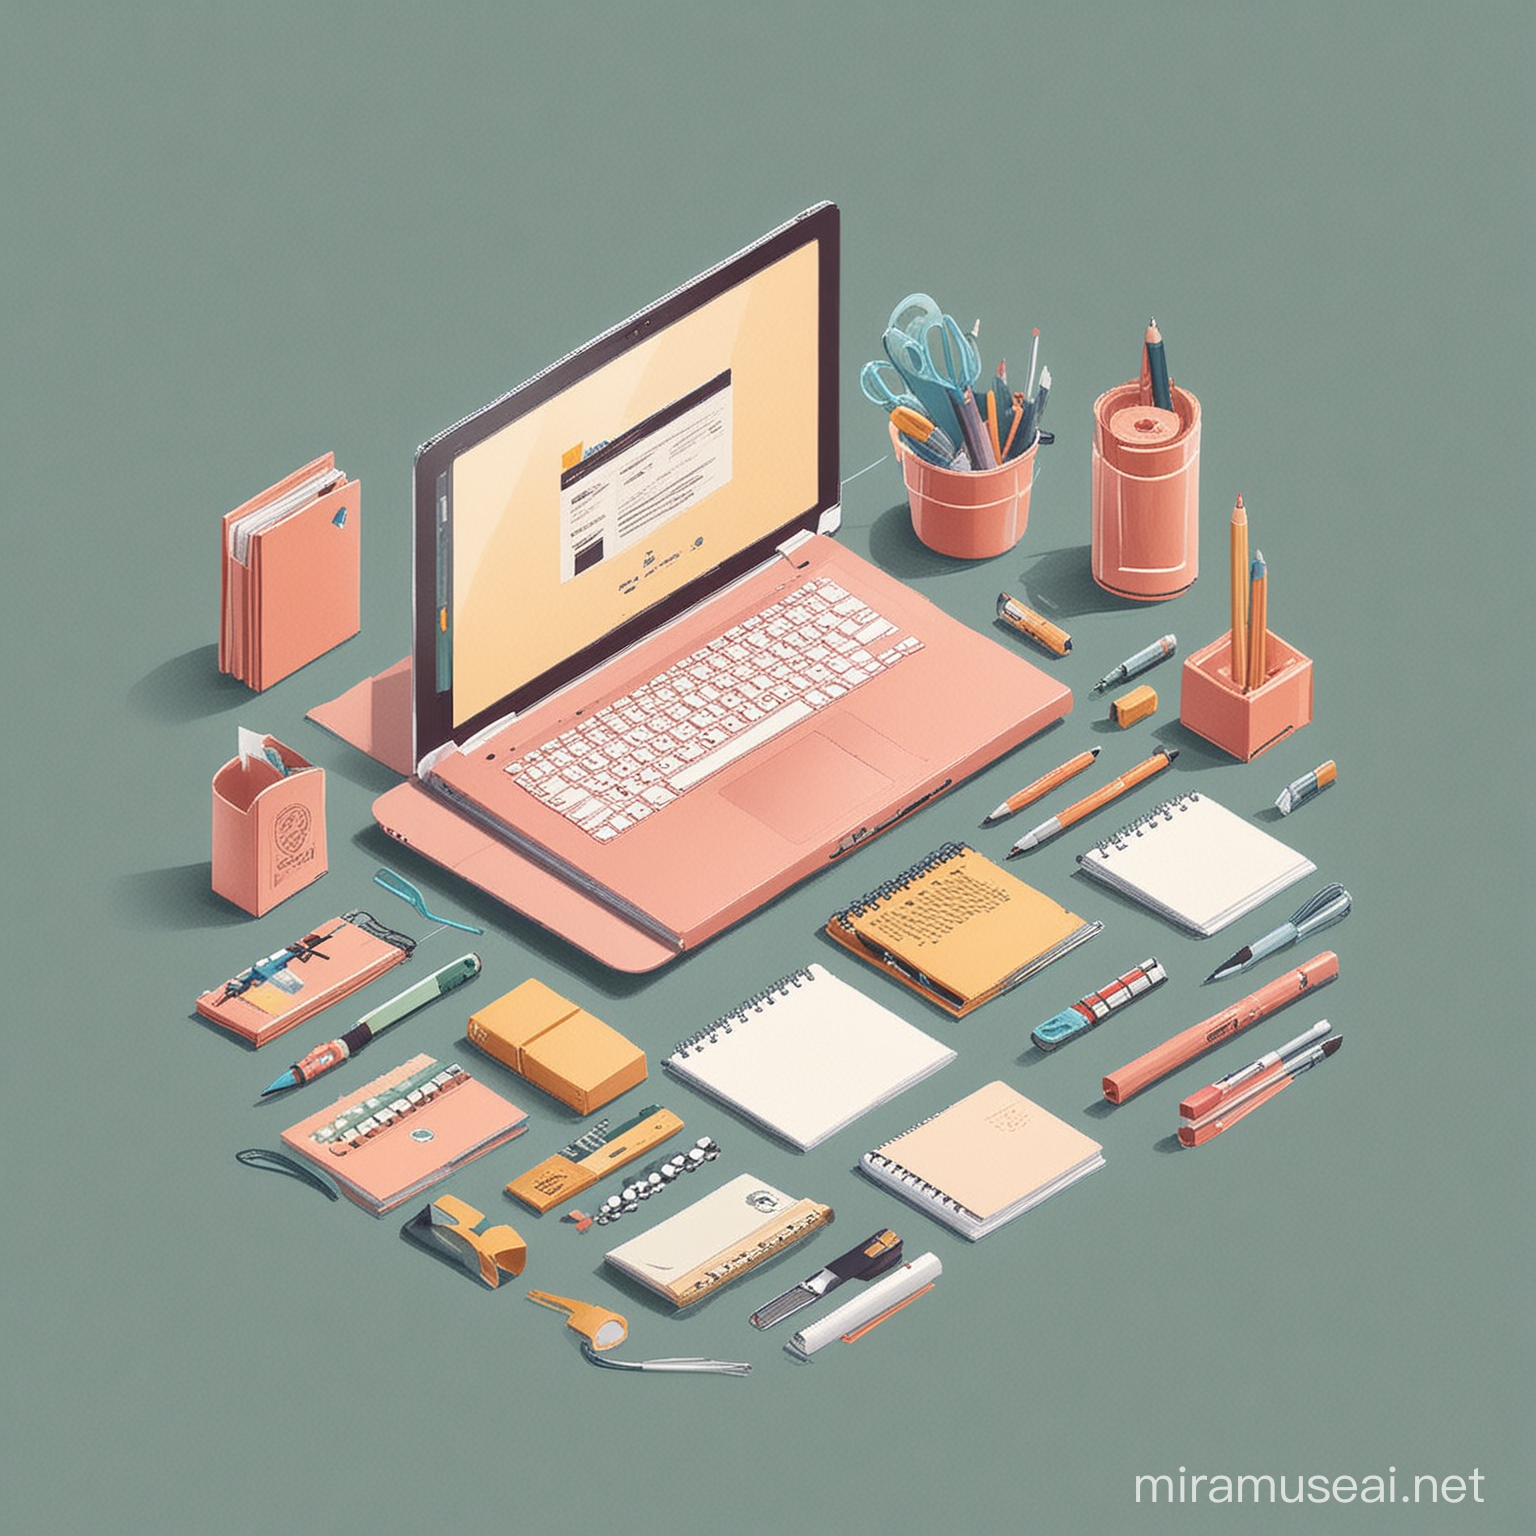 illustration a minimal graphic image about "How to build ecommerce website  of stationery" with a plain color background